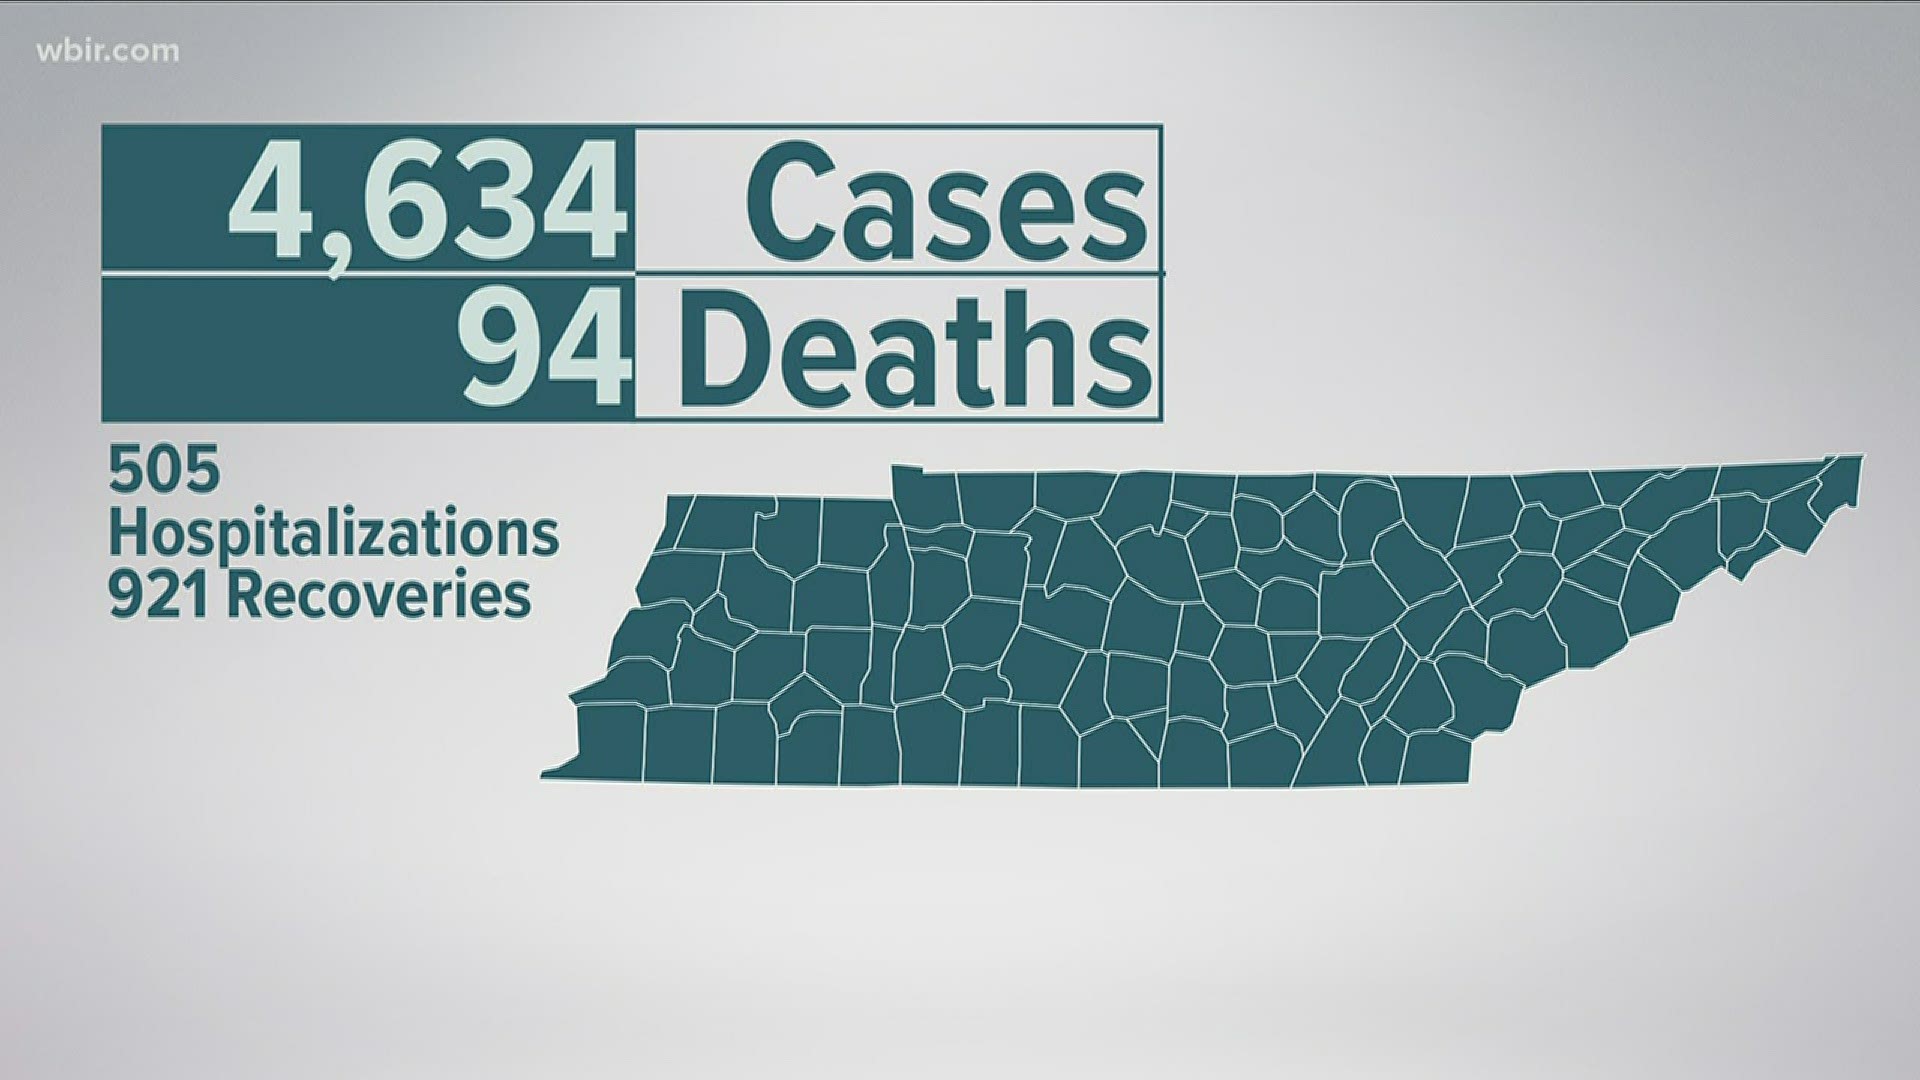 There are currently 4,634 cases of COVID-19 in Tennessee. That's more than 270 new cases since Wednesday.